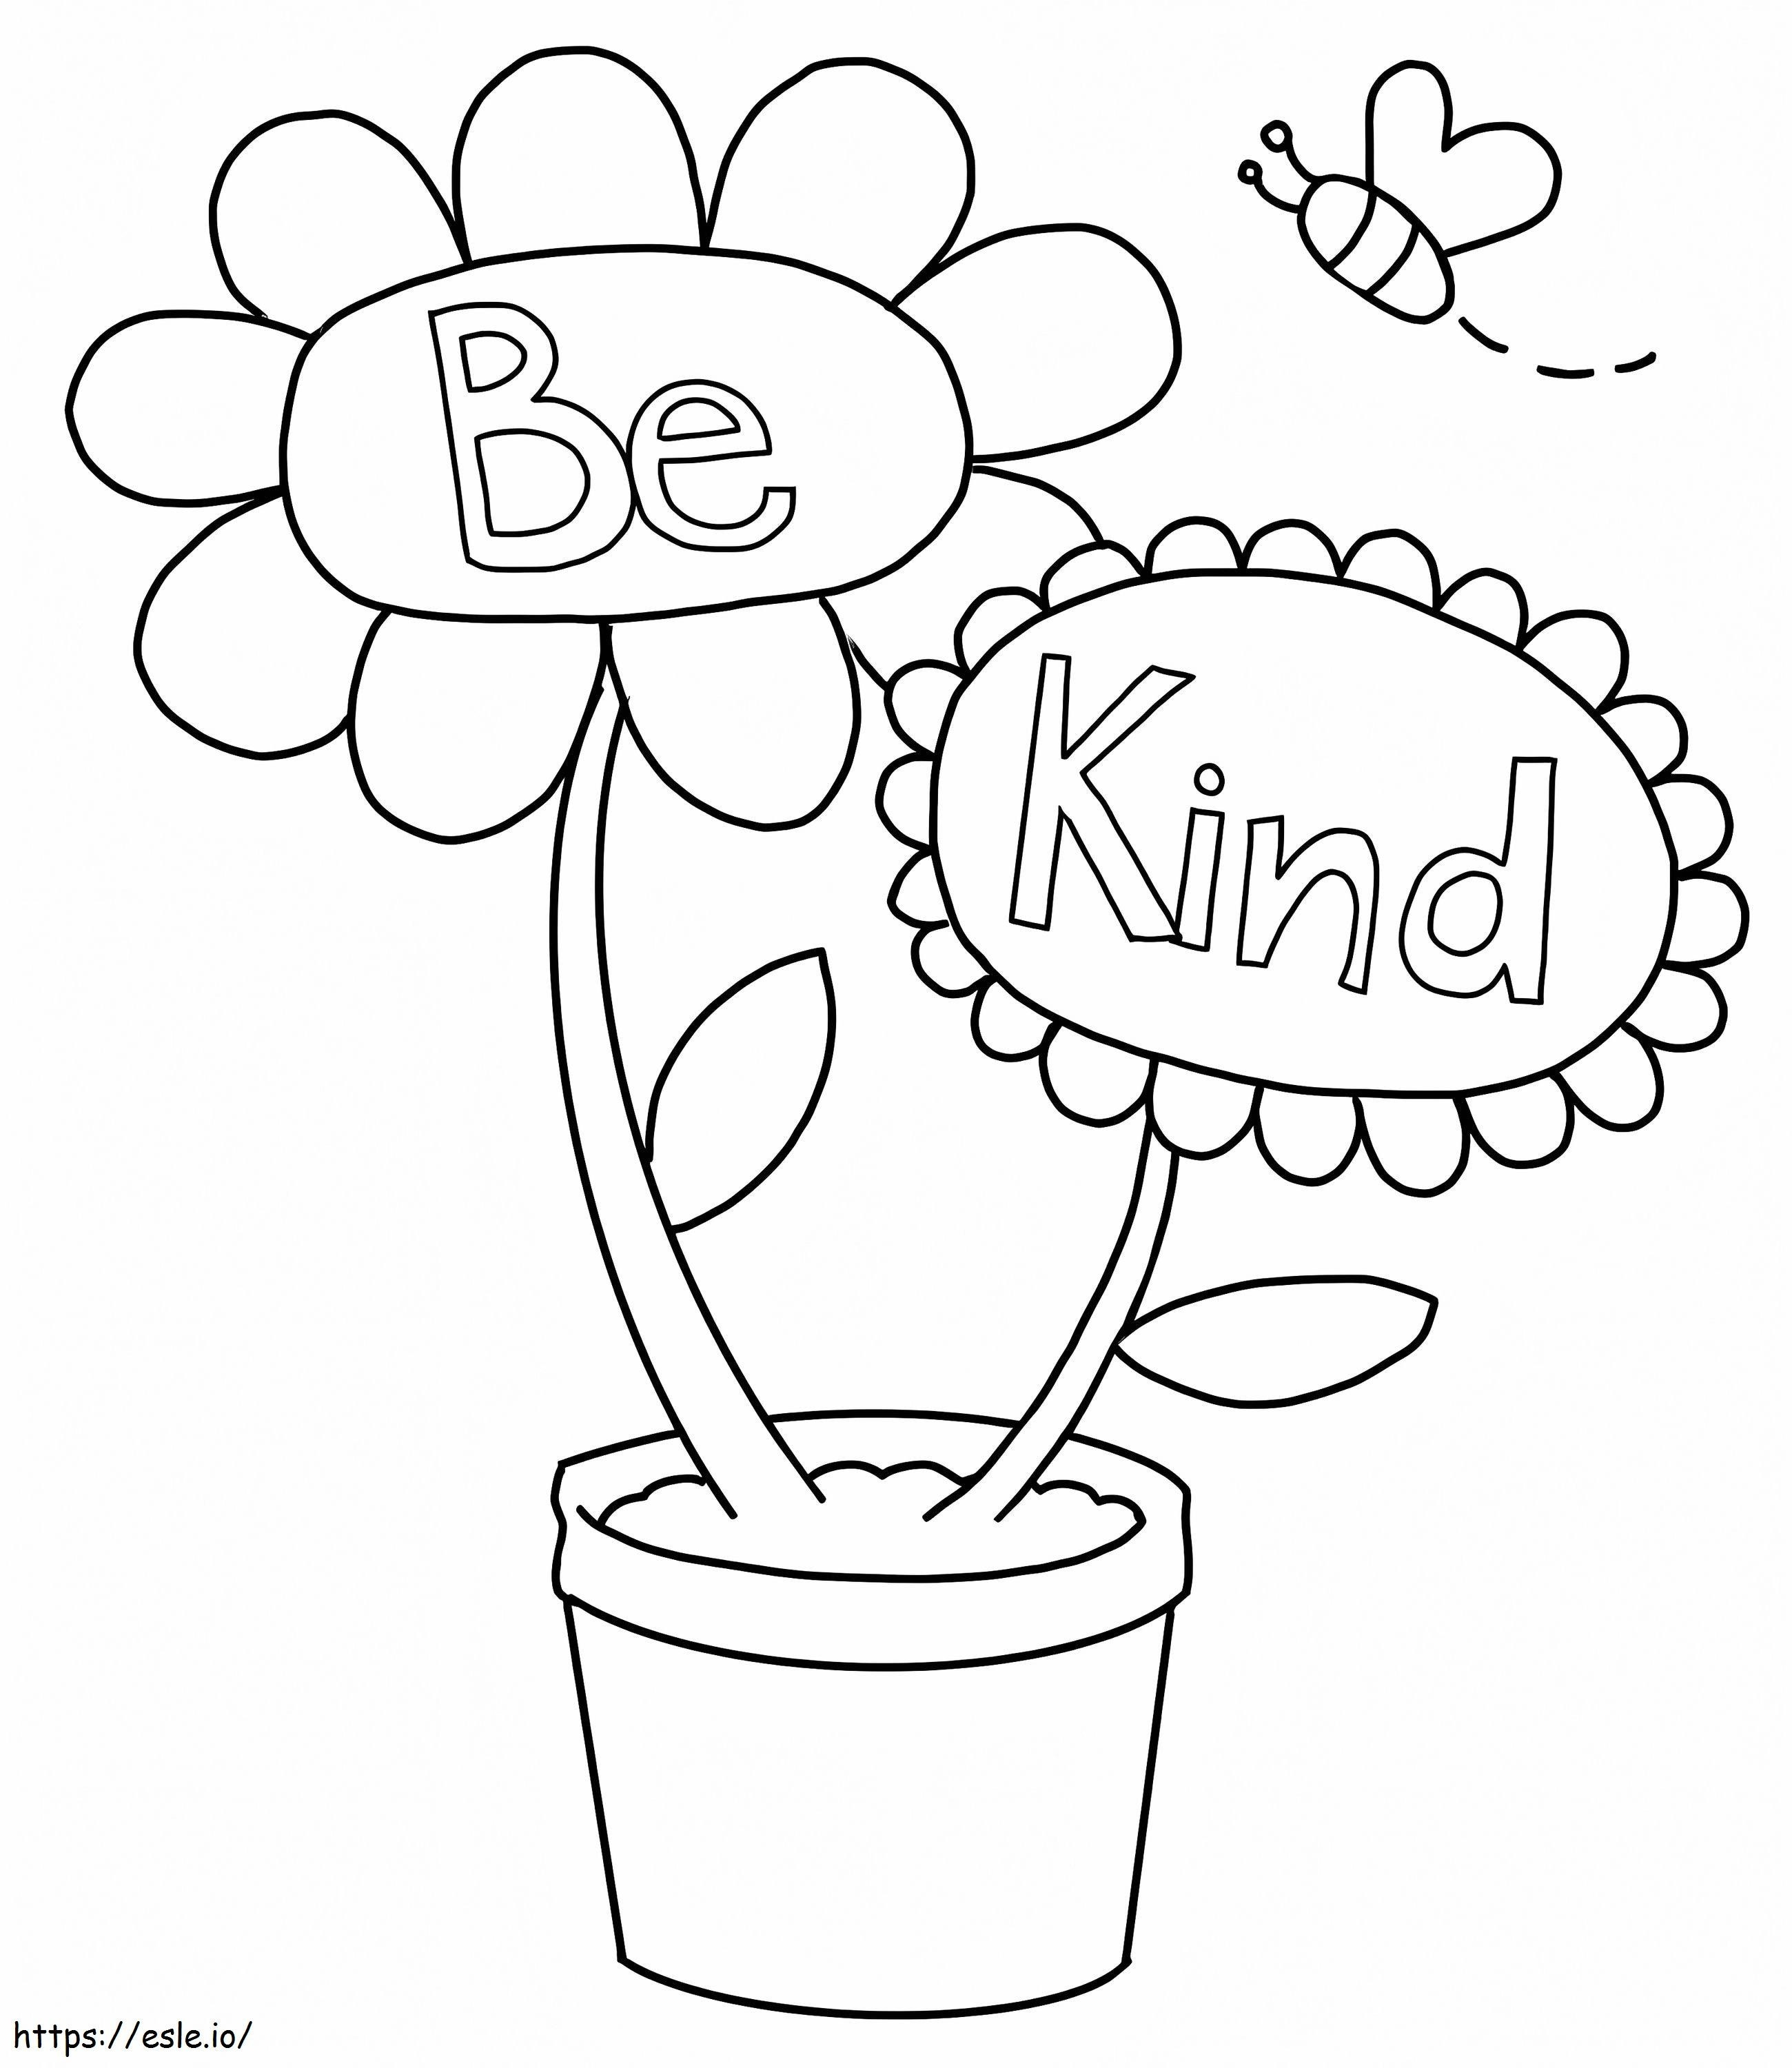 Printable Be Kind coloring page